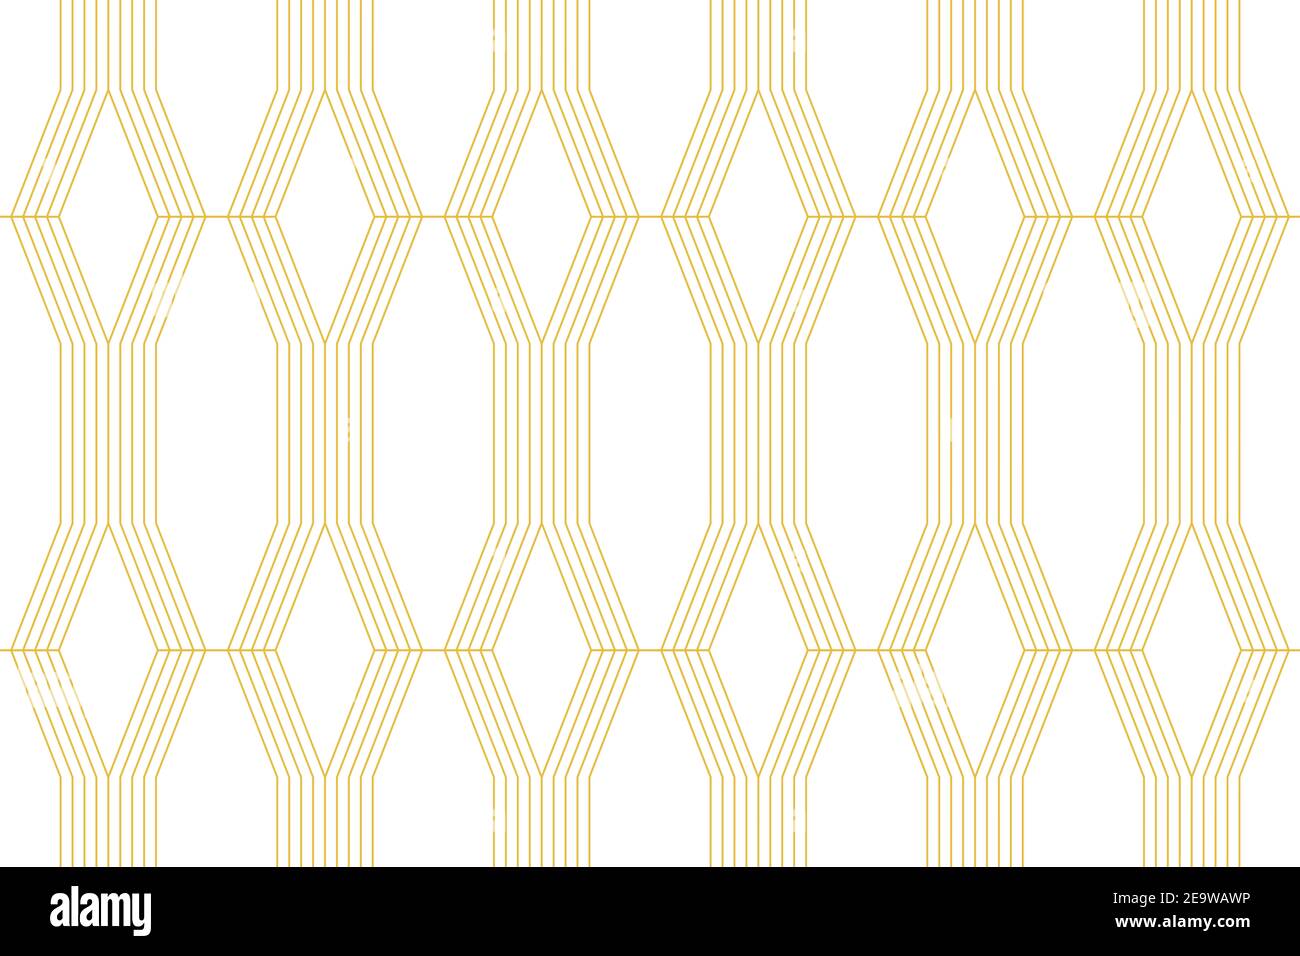 Seamless, abstract background pattern made with repeated lines forming rhombus geometric shapes. Modern, simple vector art in yellow color. Stock Photo